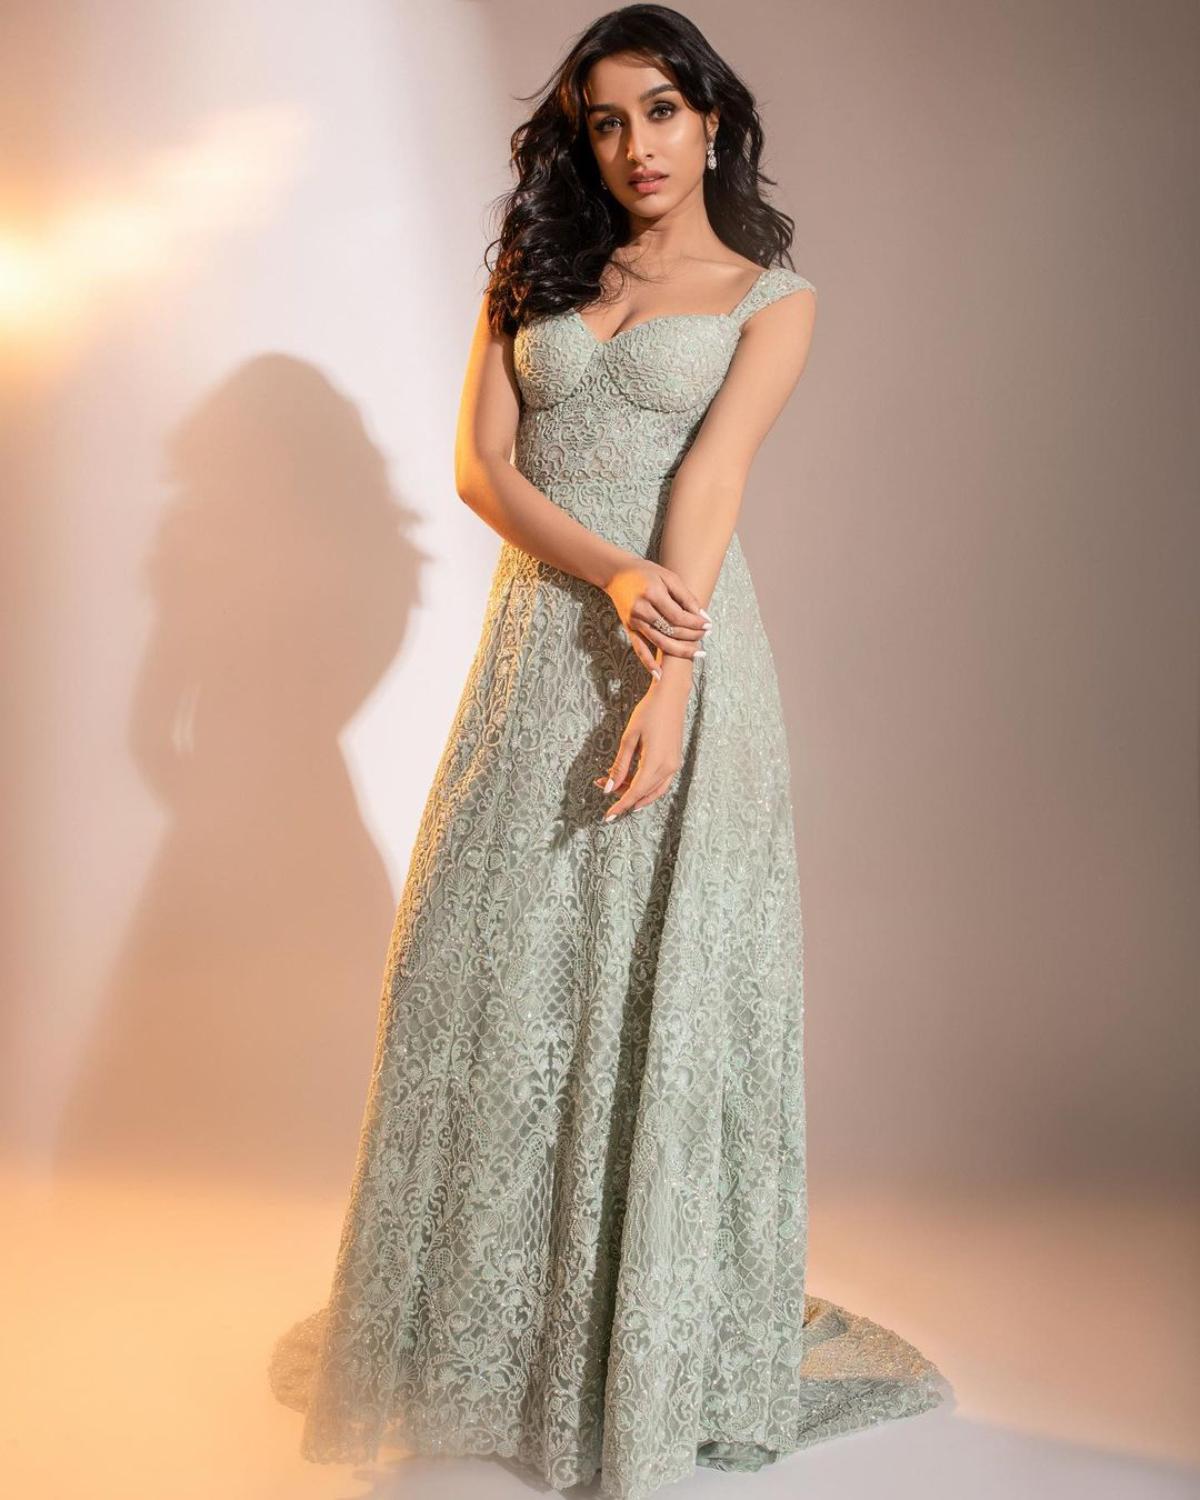 The 'Stree' star looks magical as she dons an alluring light ash green gown with innate elan. The unique colour of the gown and the intricate embroidery work along with slight embellishments makes her ensemble stand out. Despite the 'no-jewellery' look, Shraddha looks resplendent as she shines with her natural glow which adds the beauty of her otherwise pal-looking gown. 